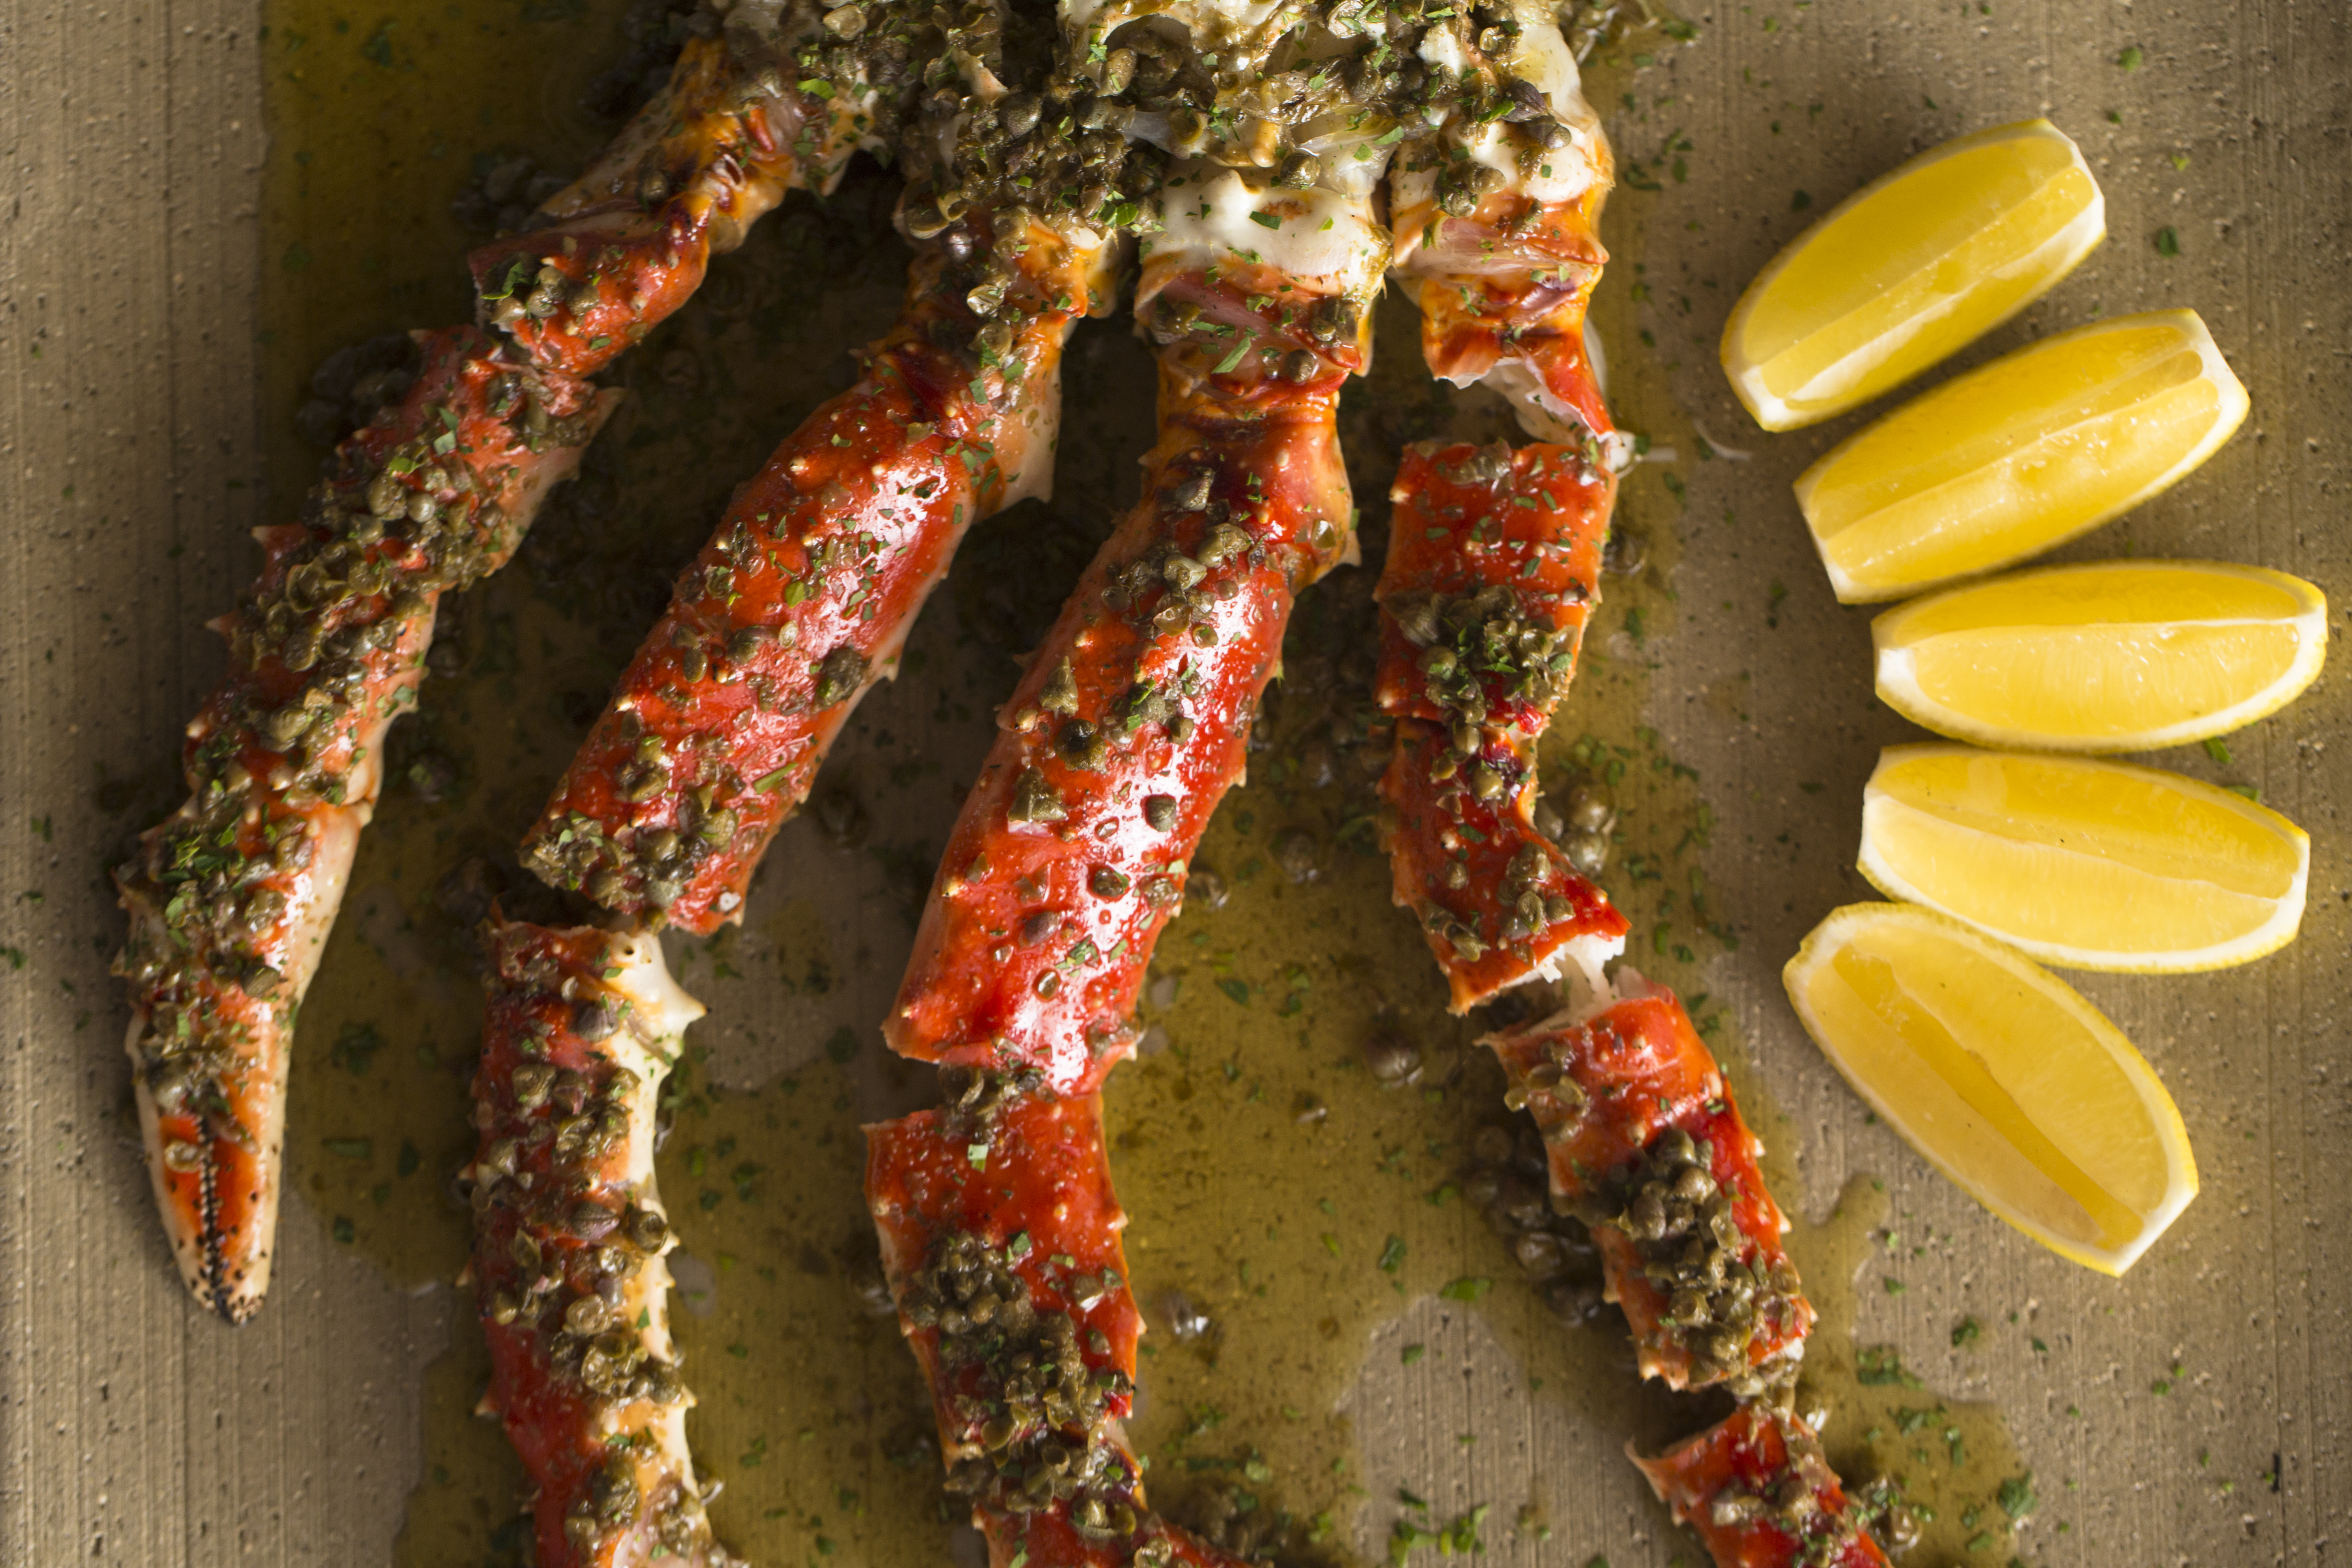 King crab and garlic brown butter